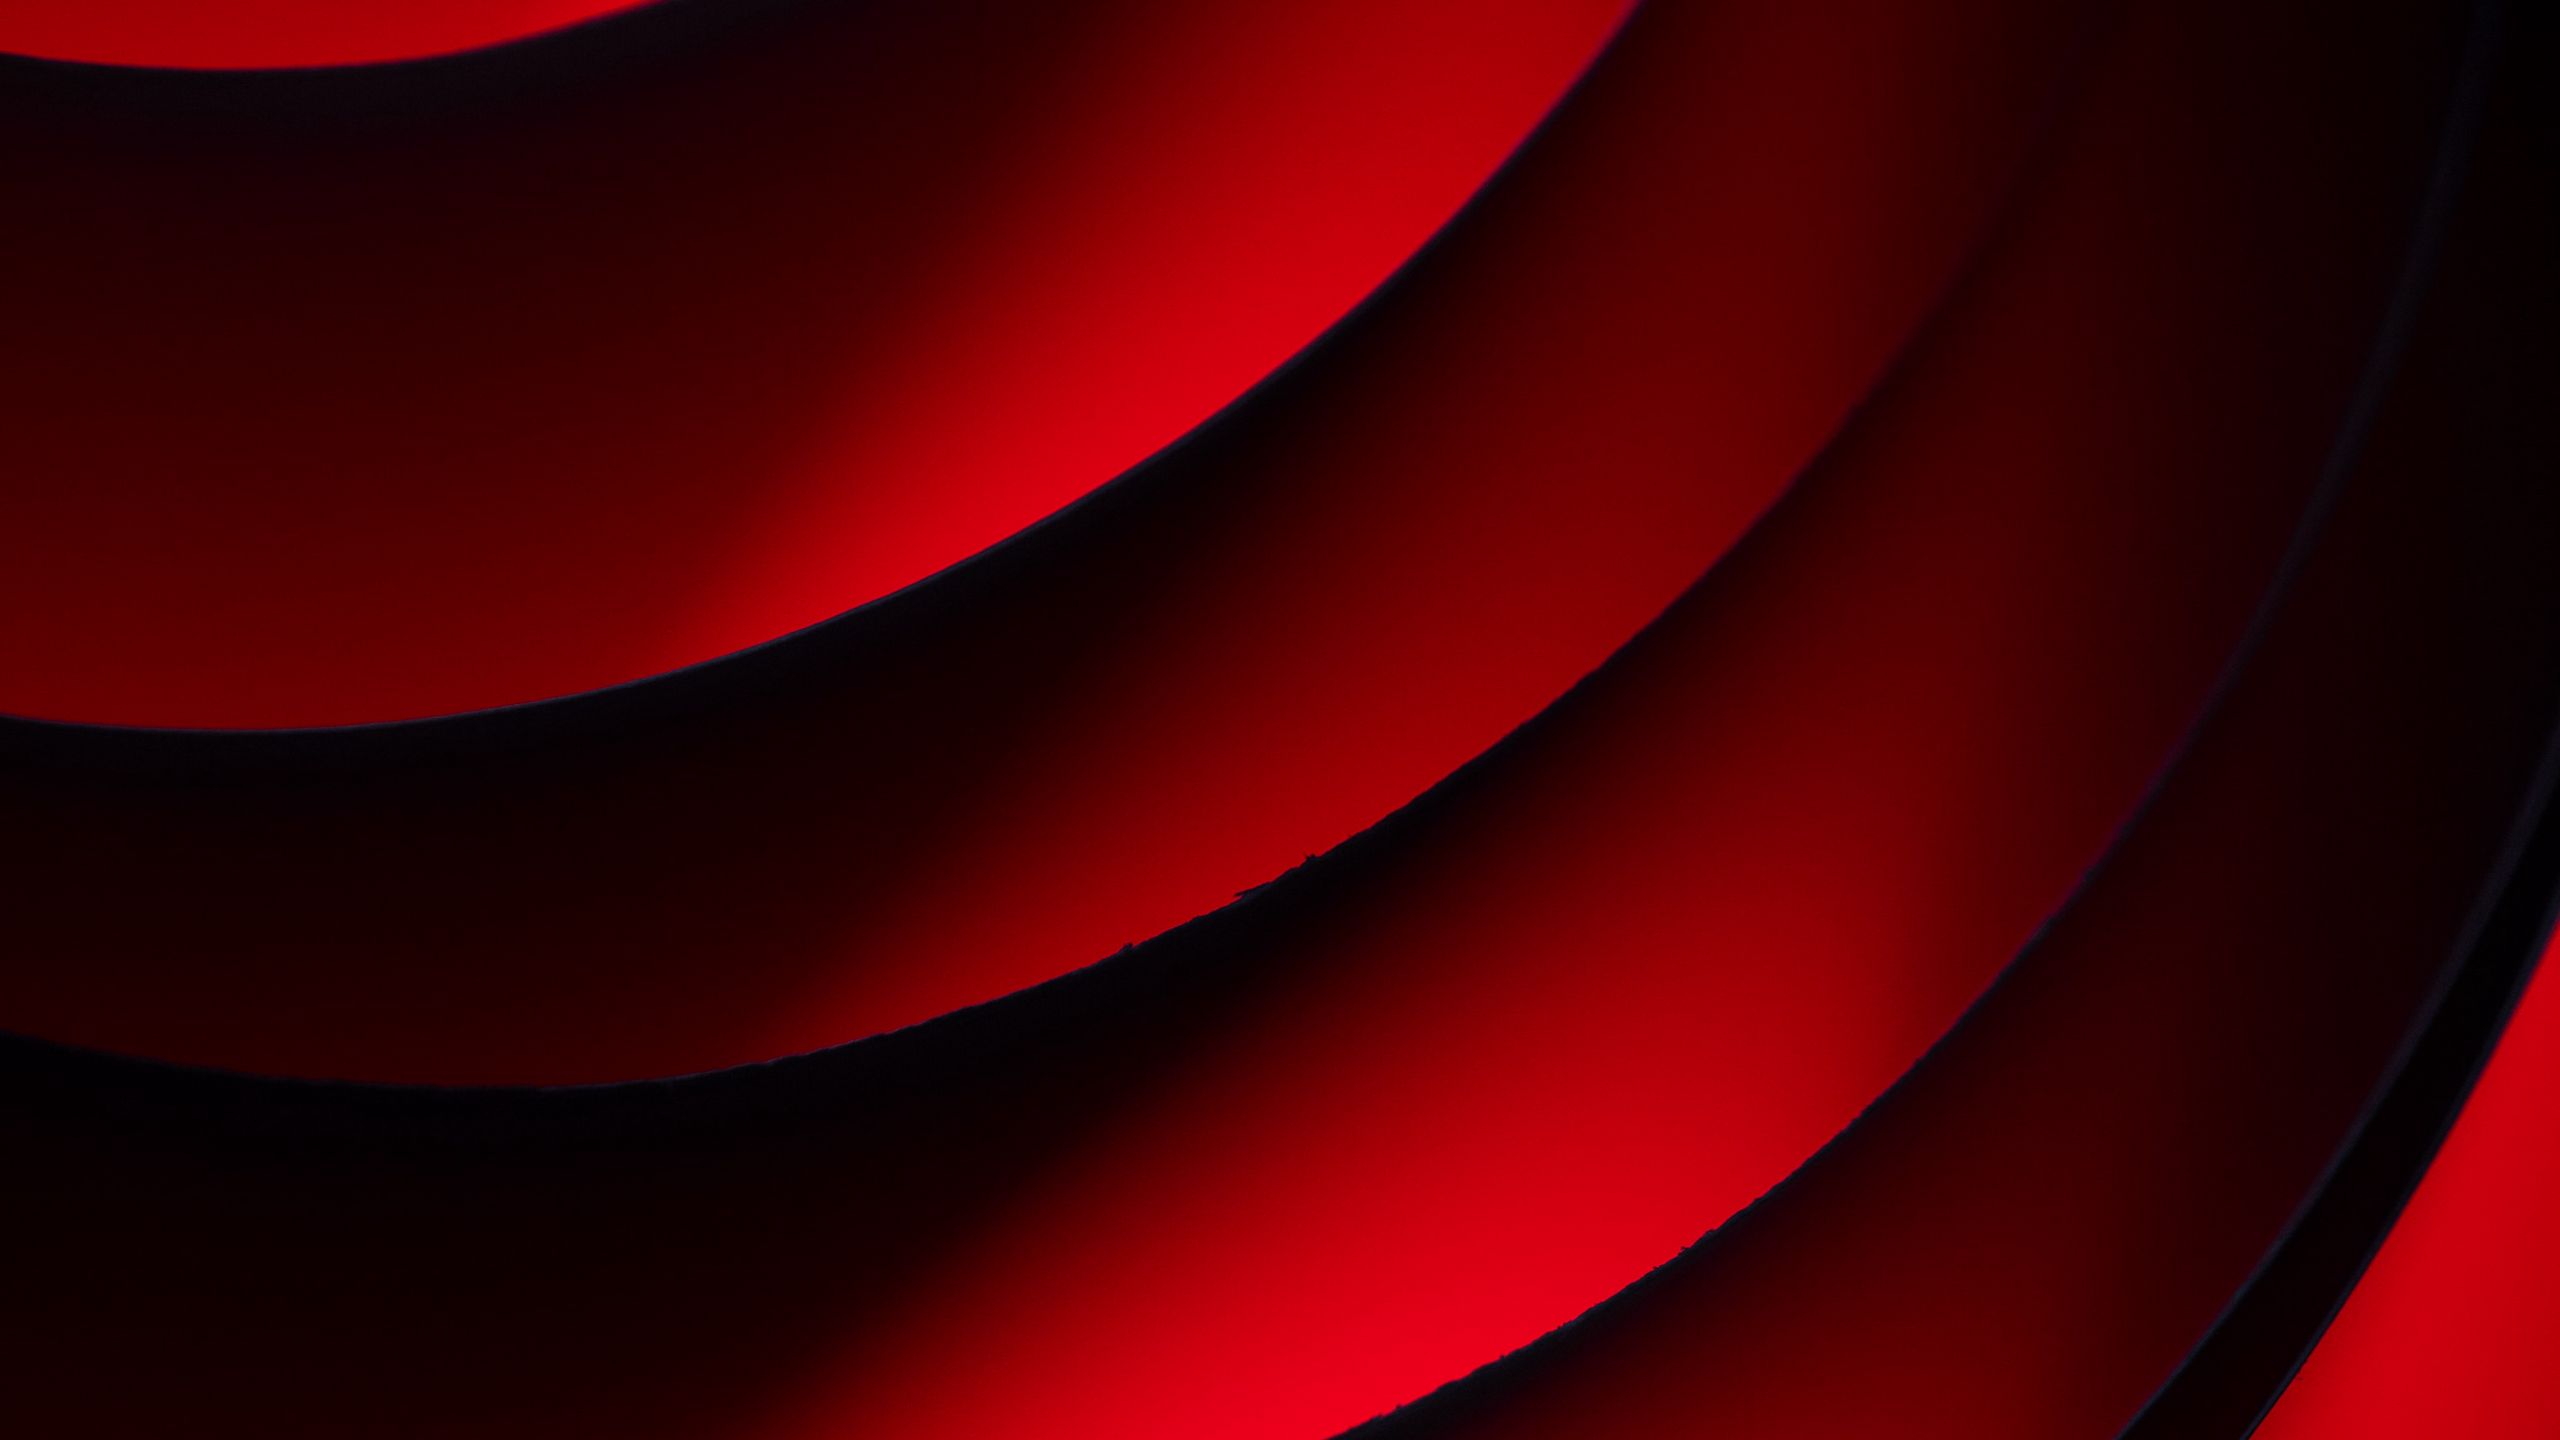 Download wallpaper 2560x1440 paper, layers, red, dark widescreen 16:9 HD background